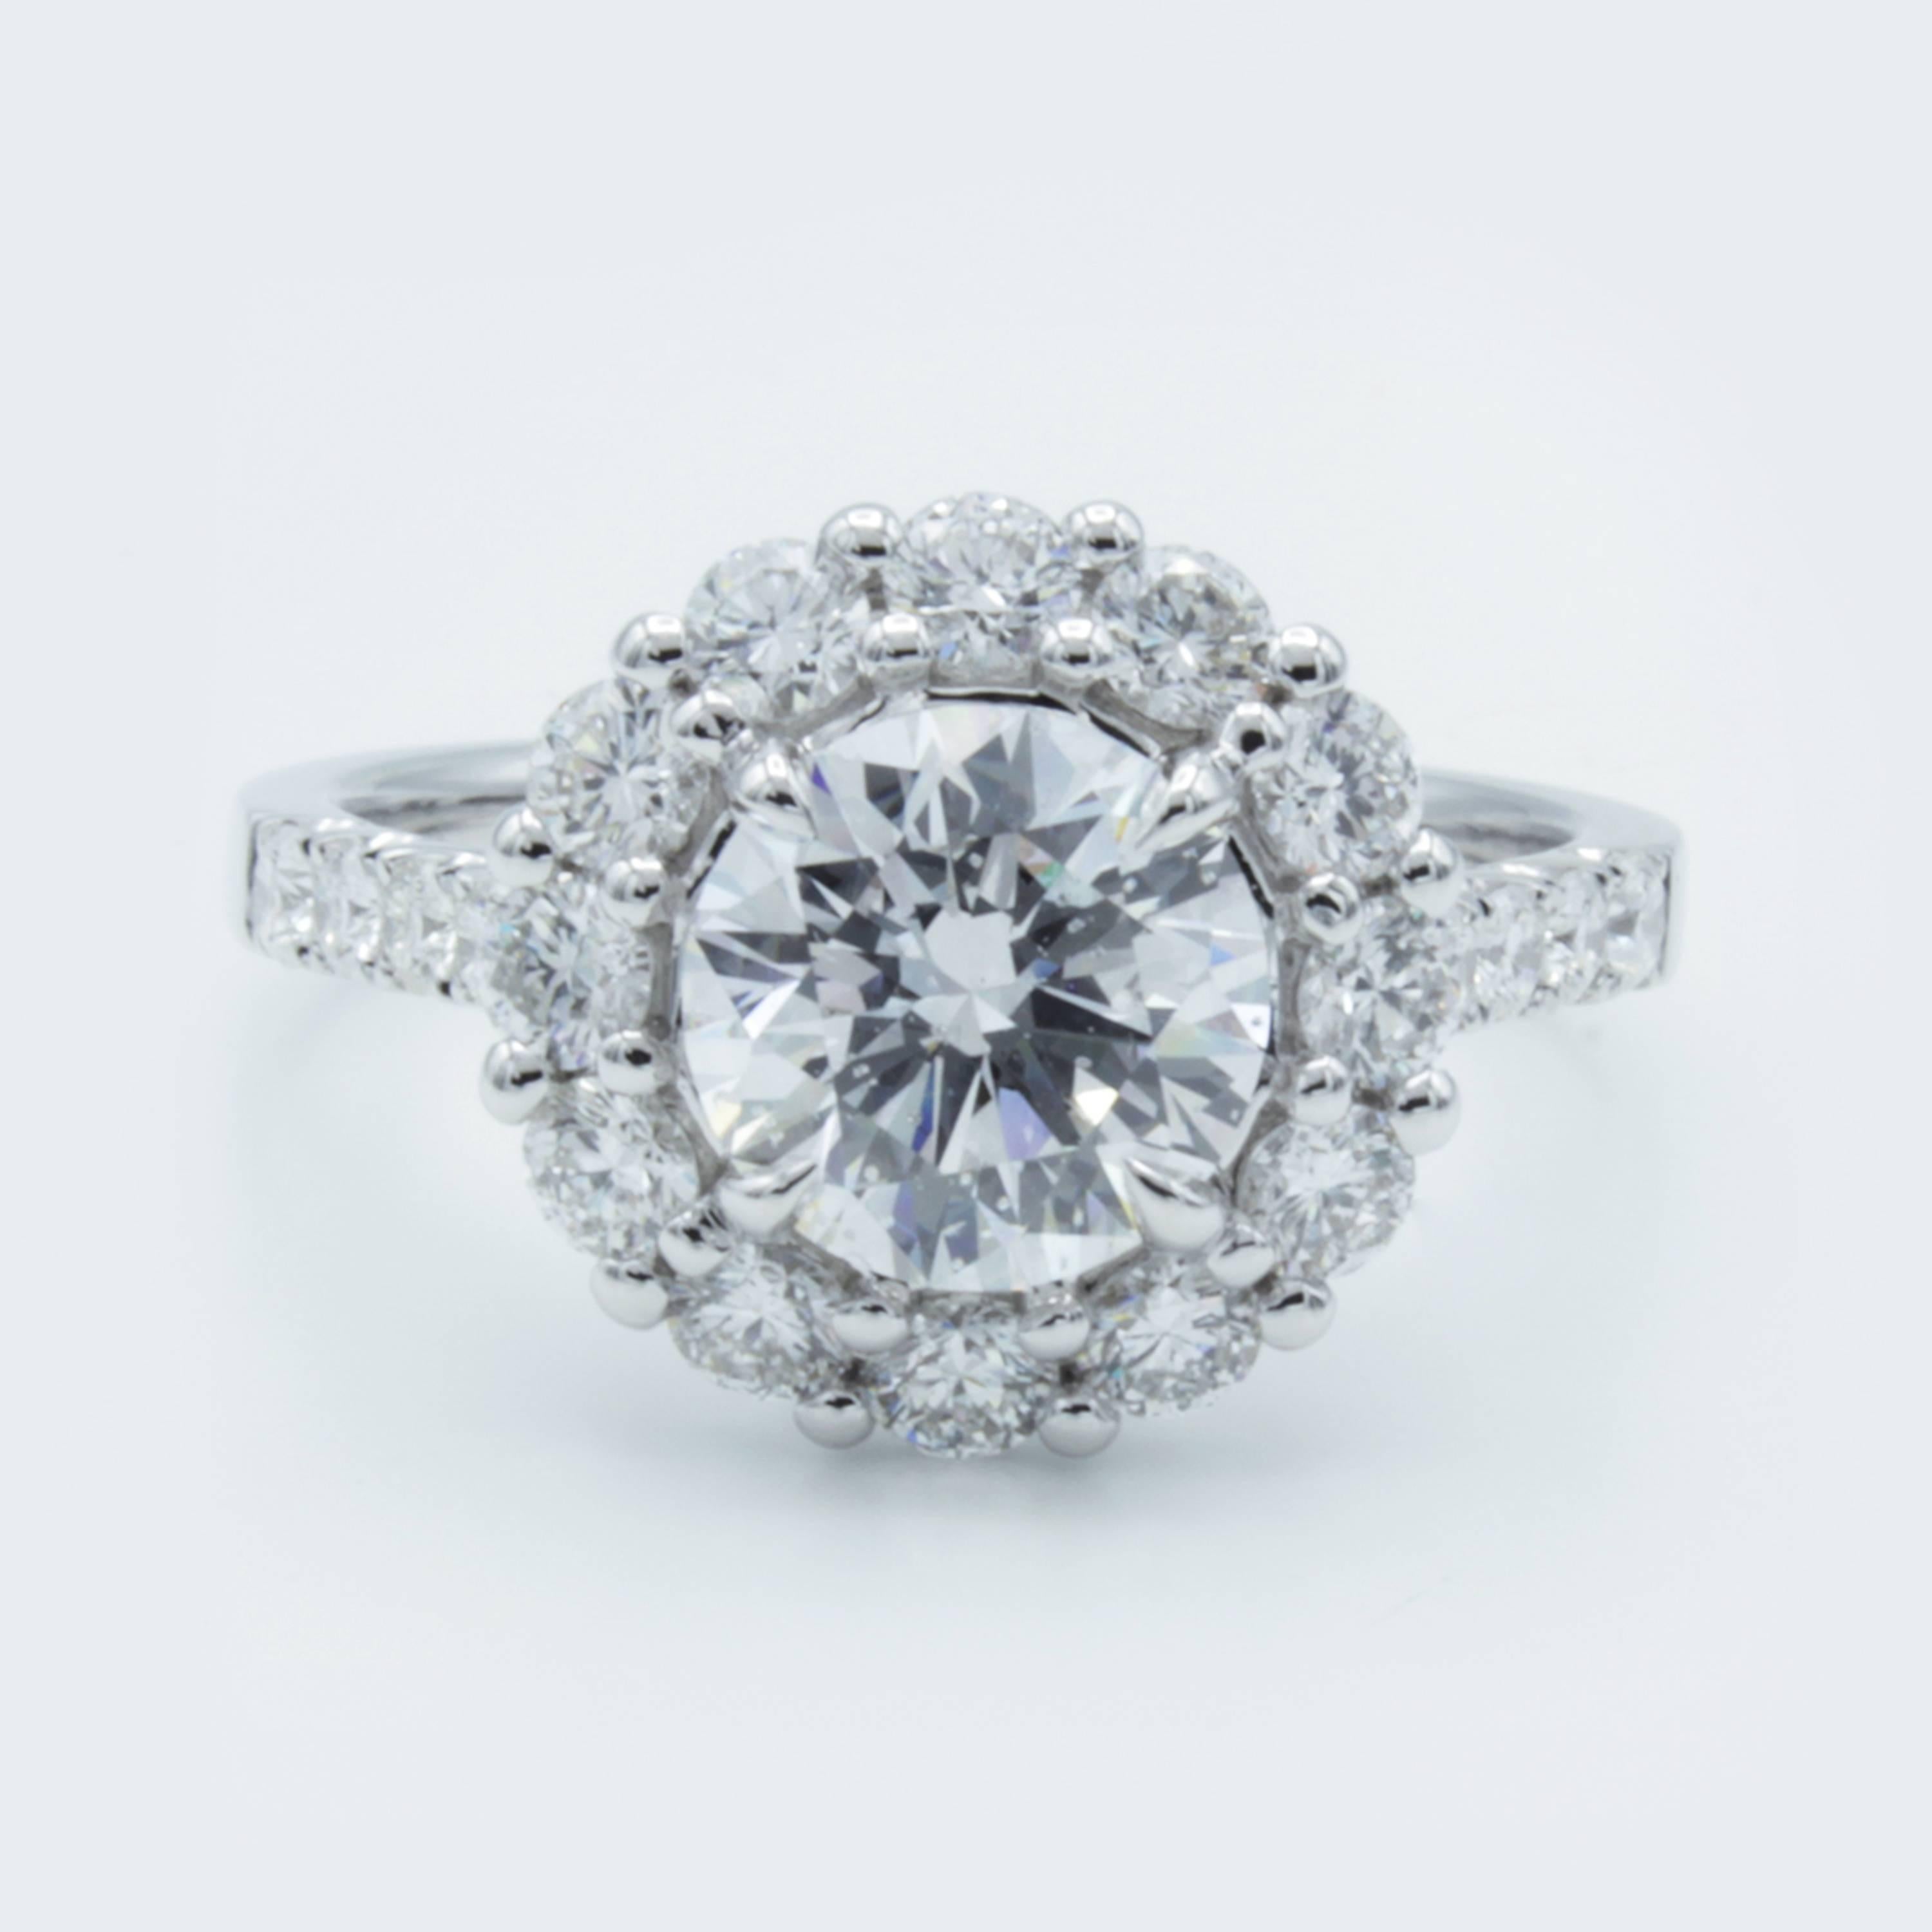 A beautiful flower blossoms in this Rosenberg Diamonds & Co. engagement ring. A GIA certified 1.54 carat round brilliant cut diamond rests surrounded by glittering white pave set diamond accents within a band of 18Kt white gold. Designed by David